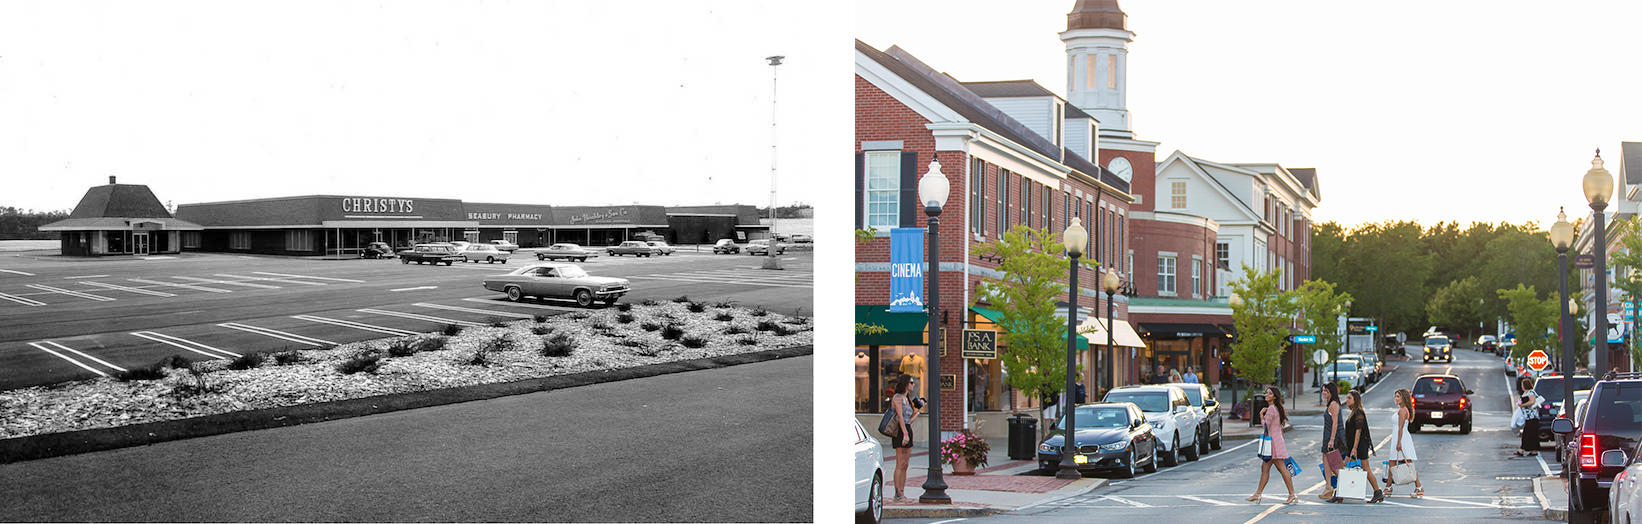 Comparison of an old photo of Mashpee Commons versus a modern renovation